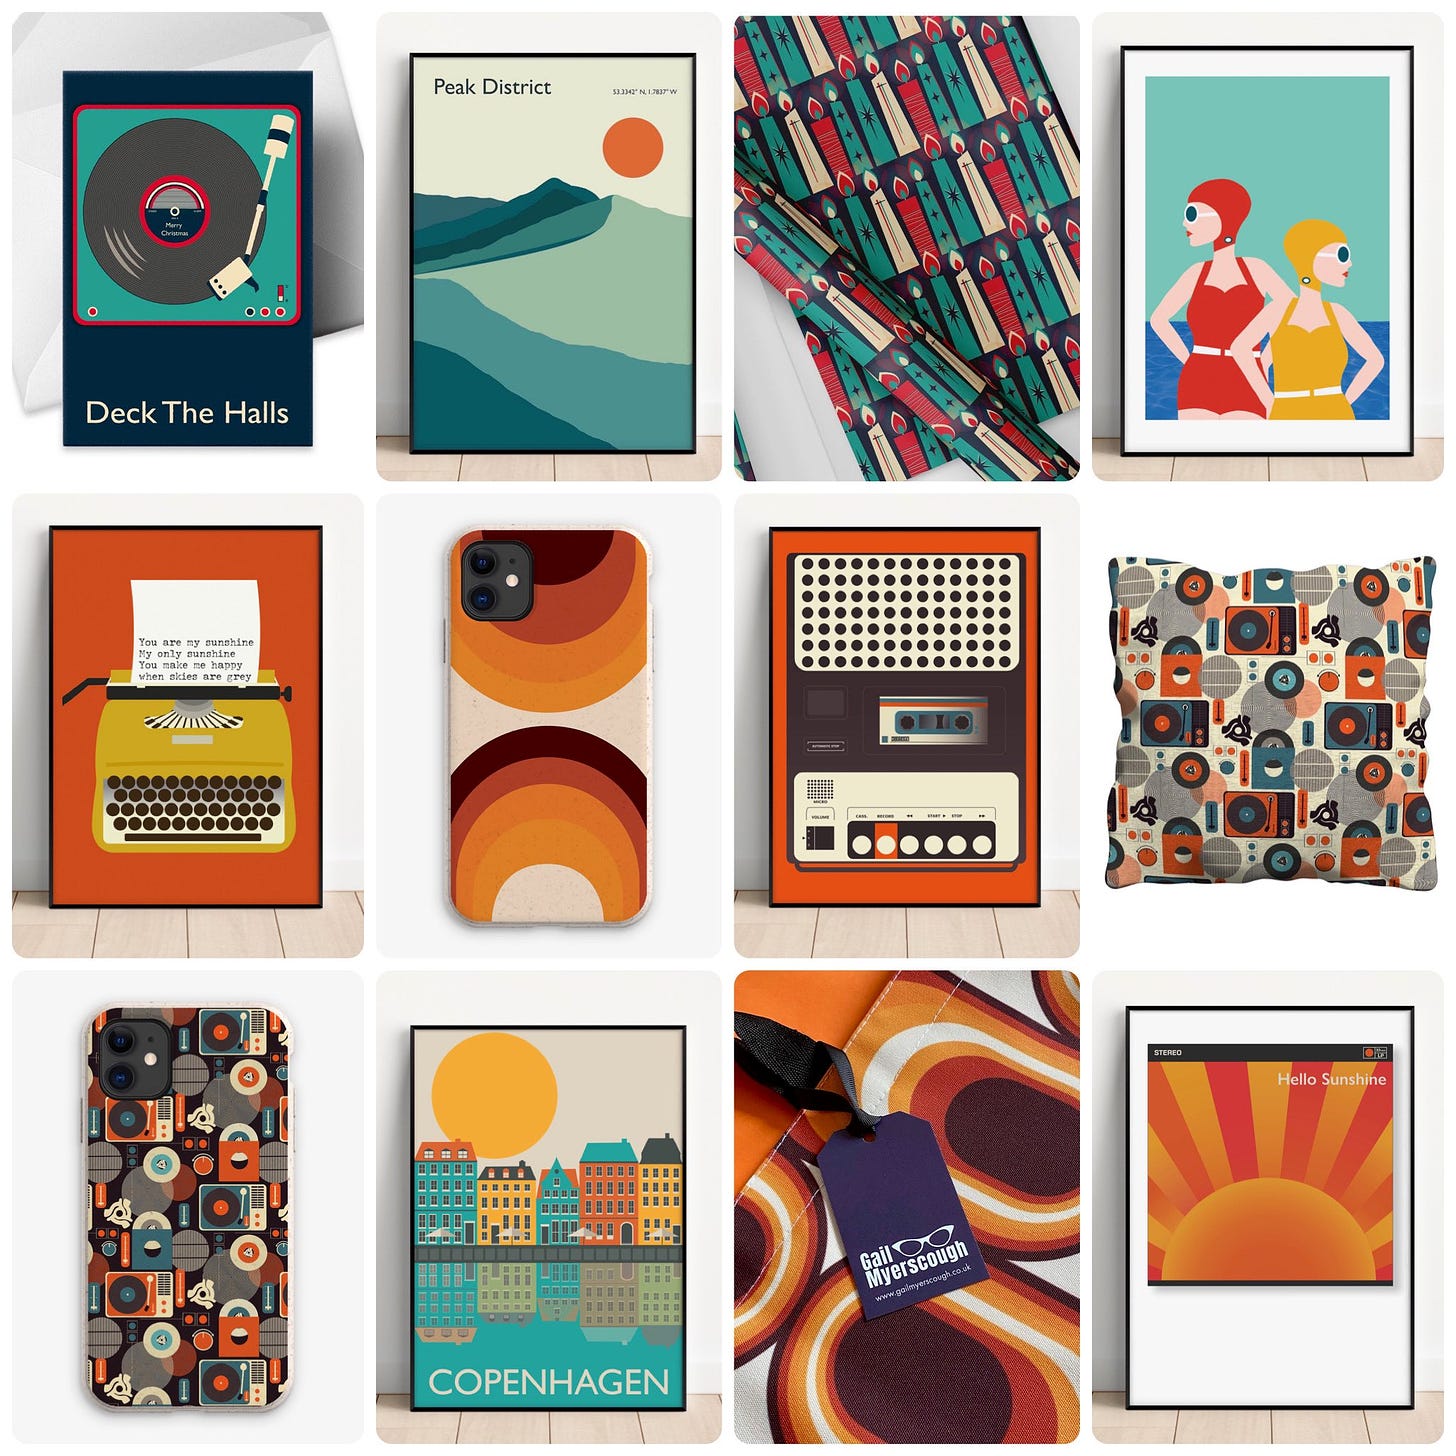 An image combining twelve of Gail's designs: cards, cushions, prints, posters, phone covers.